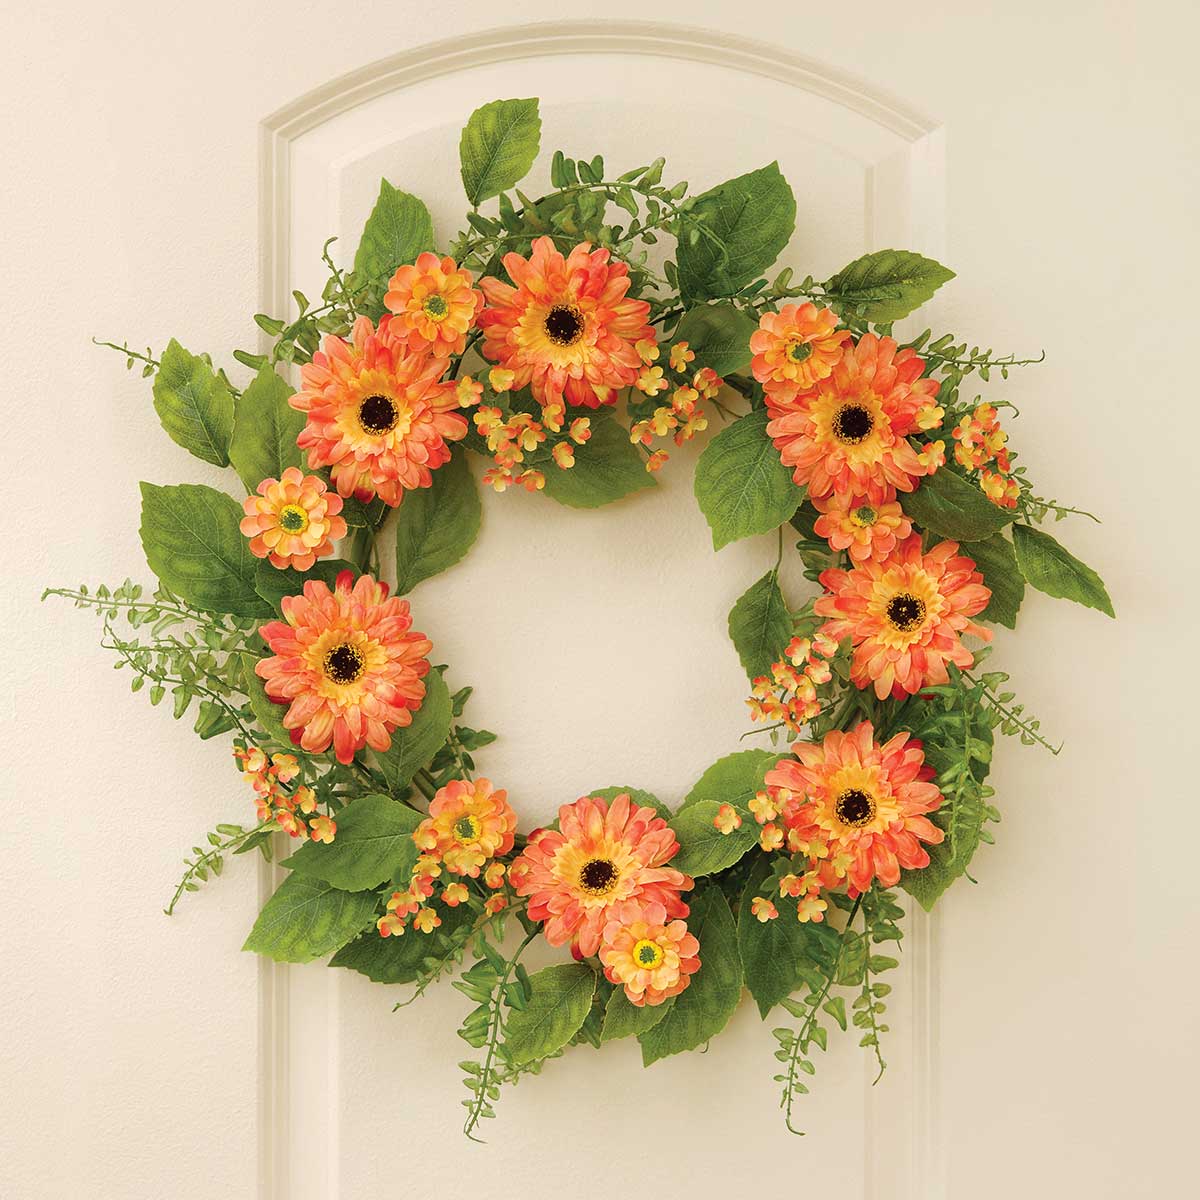 WREATH TANGERINE DAISY 22IN (INNER RING 11IN) - Click Image to Close